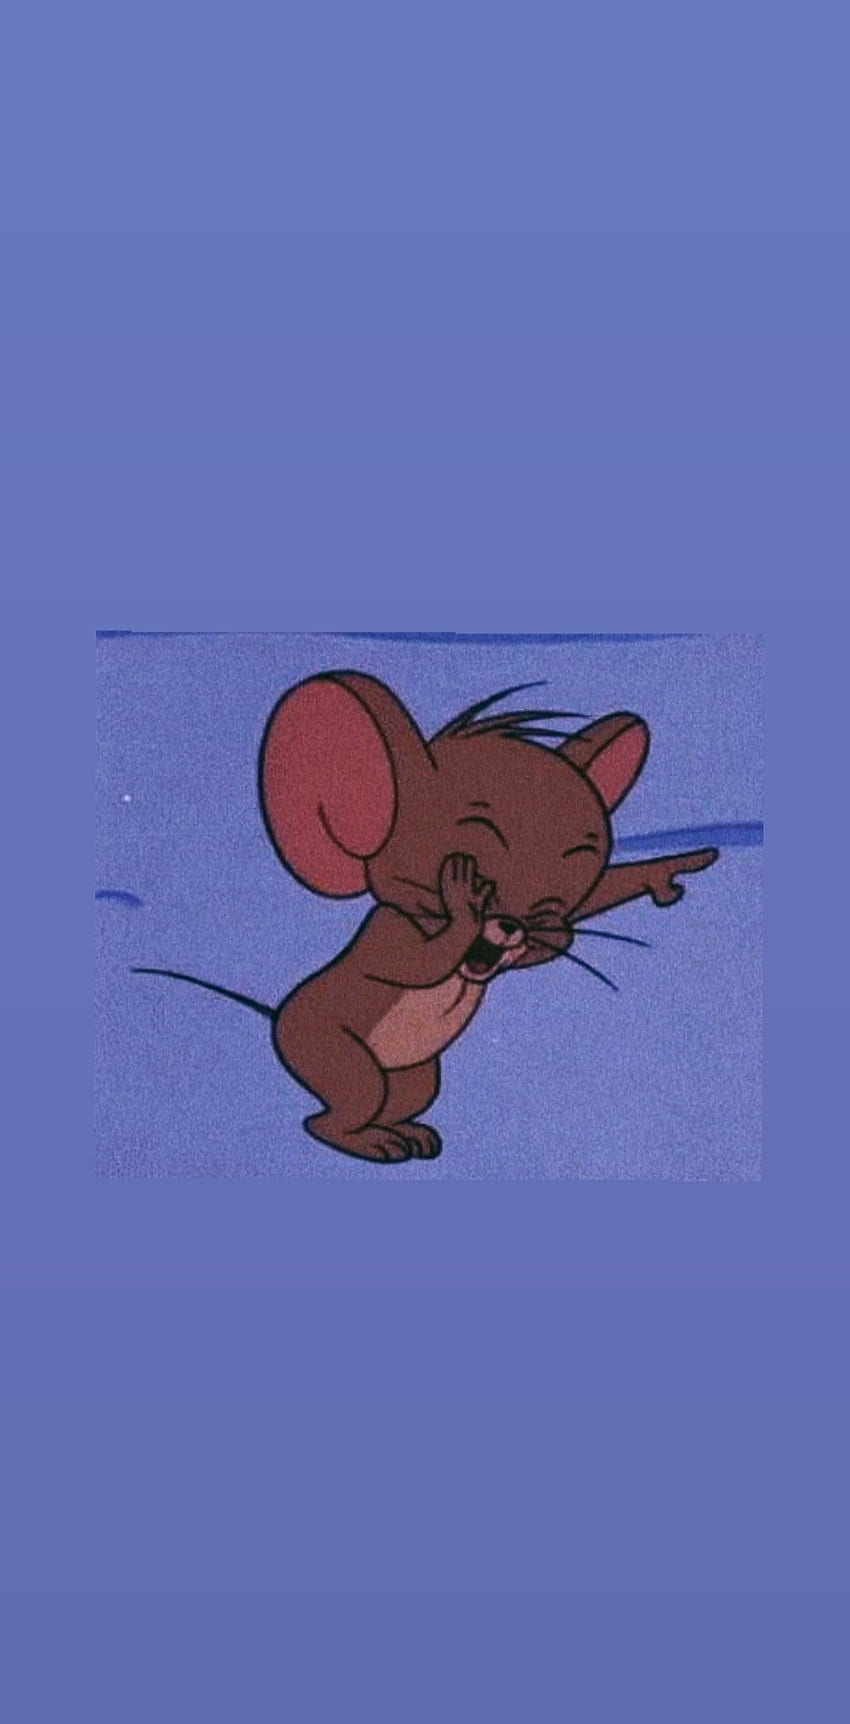 Jerry iPhone wallpaper in 2020 | Tom and jerry, Jerry ... - Tom and Jerry